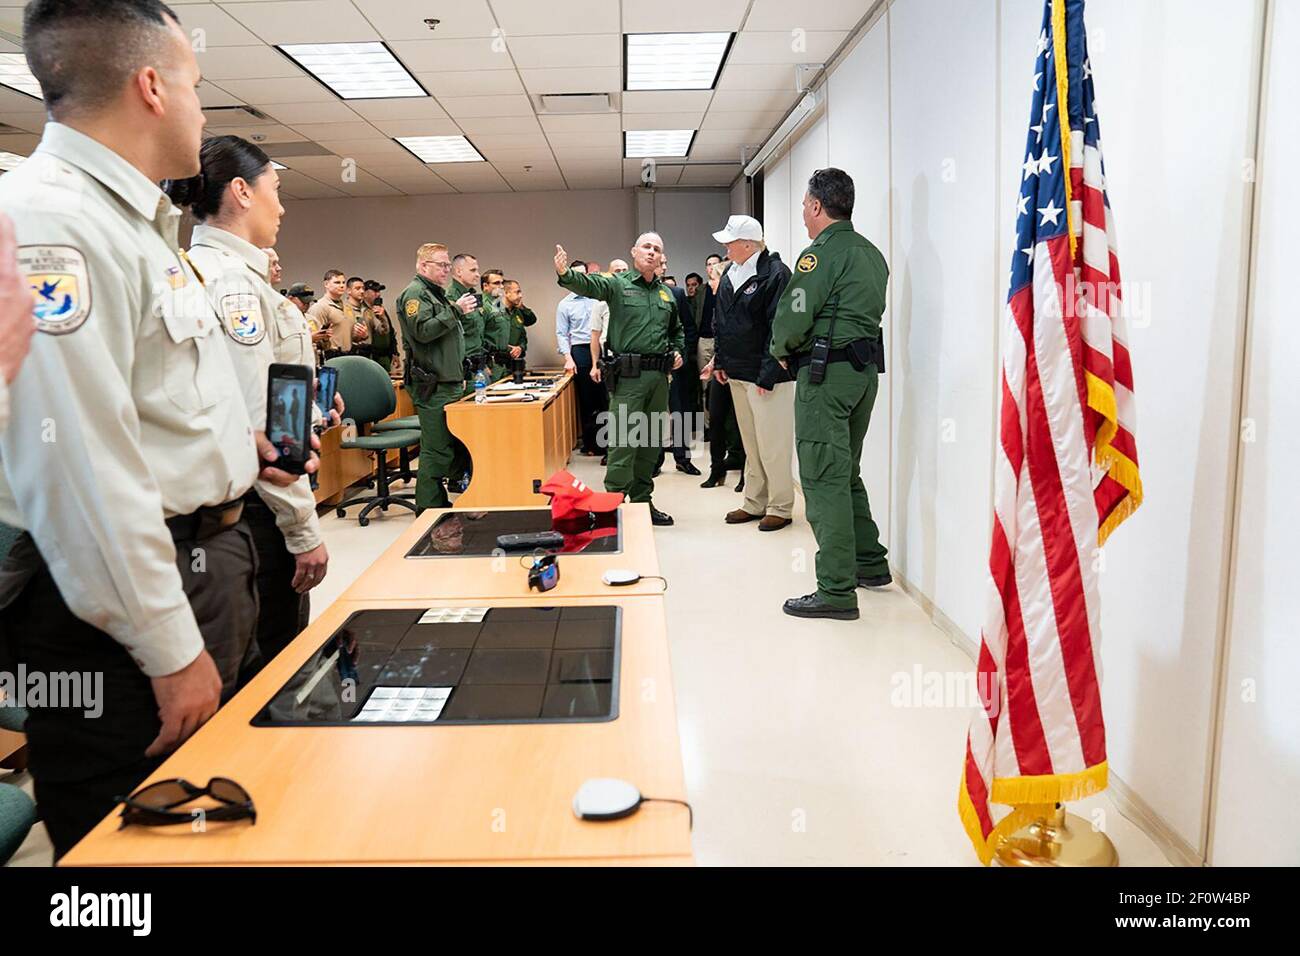 President Donald Trump speaks with U.S. Customs and Border Protection officers coming in for their shift change after President Trump attended a Roundtable on Immigration and Border Security Thursday January 10 2019 at the U.S. Border Patrol McAllen Station in McAllen Texas. Stock Photo